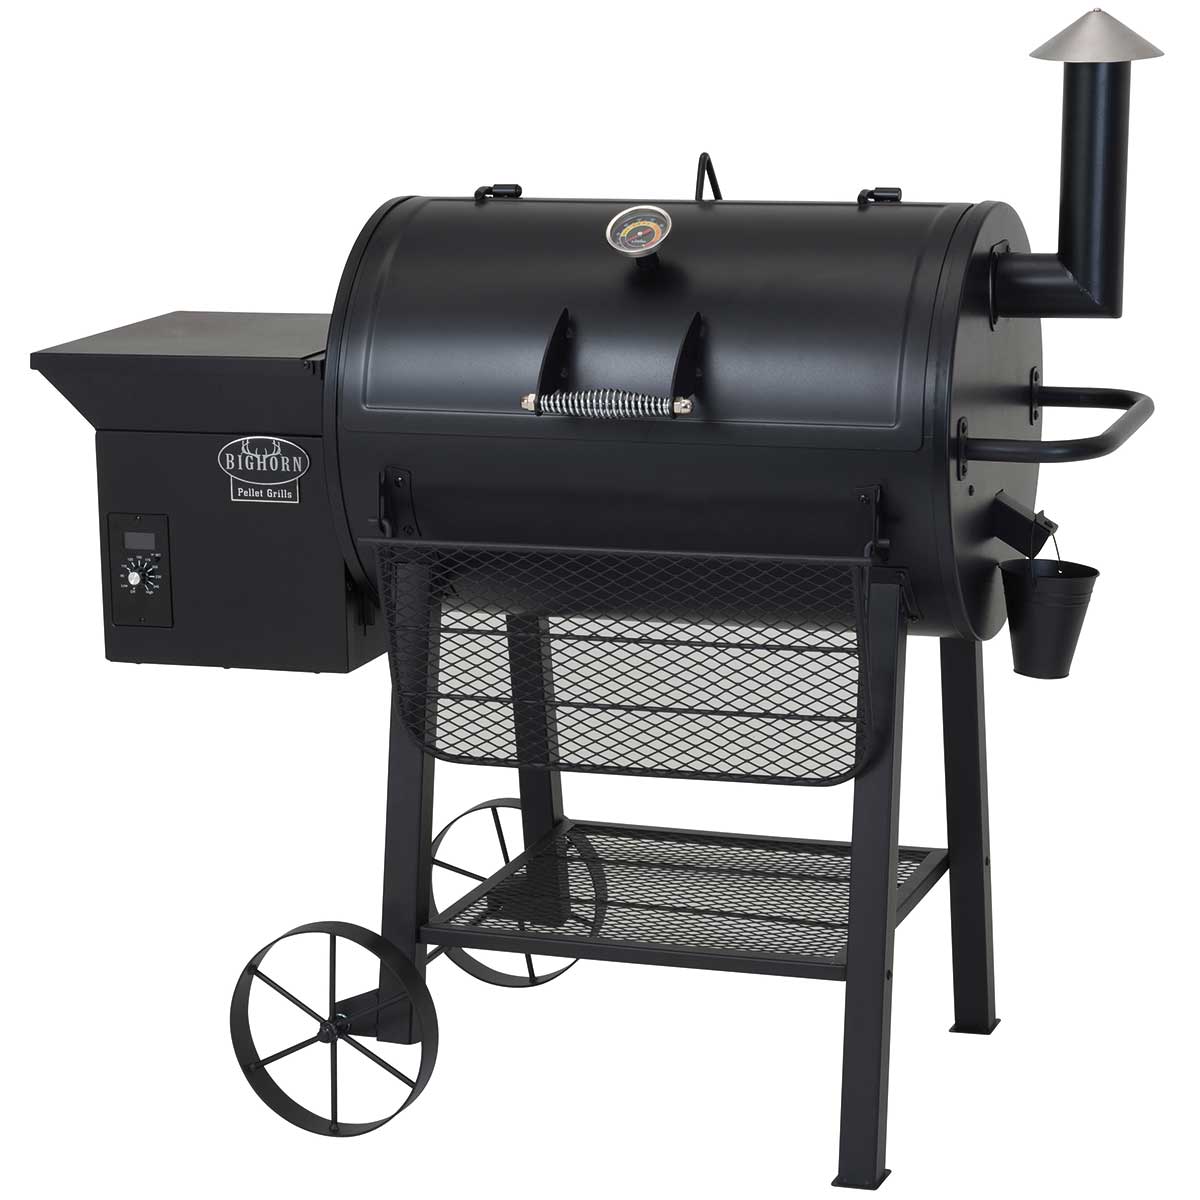 Image of Lifestyle Big Horn Pellet Smoker + Grill